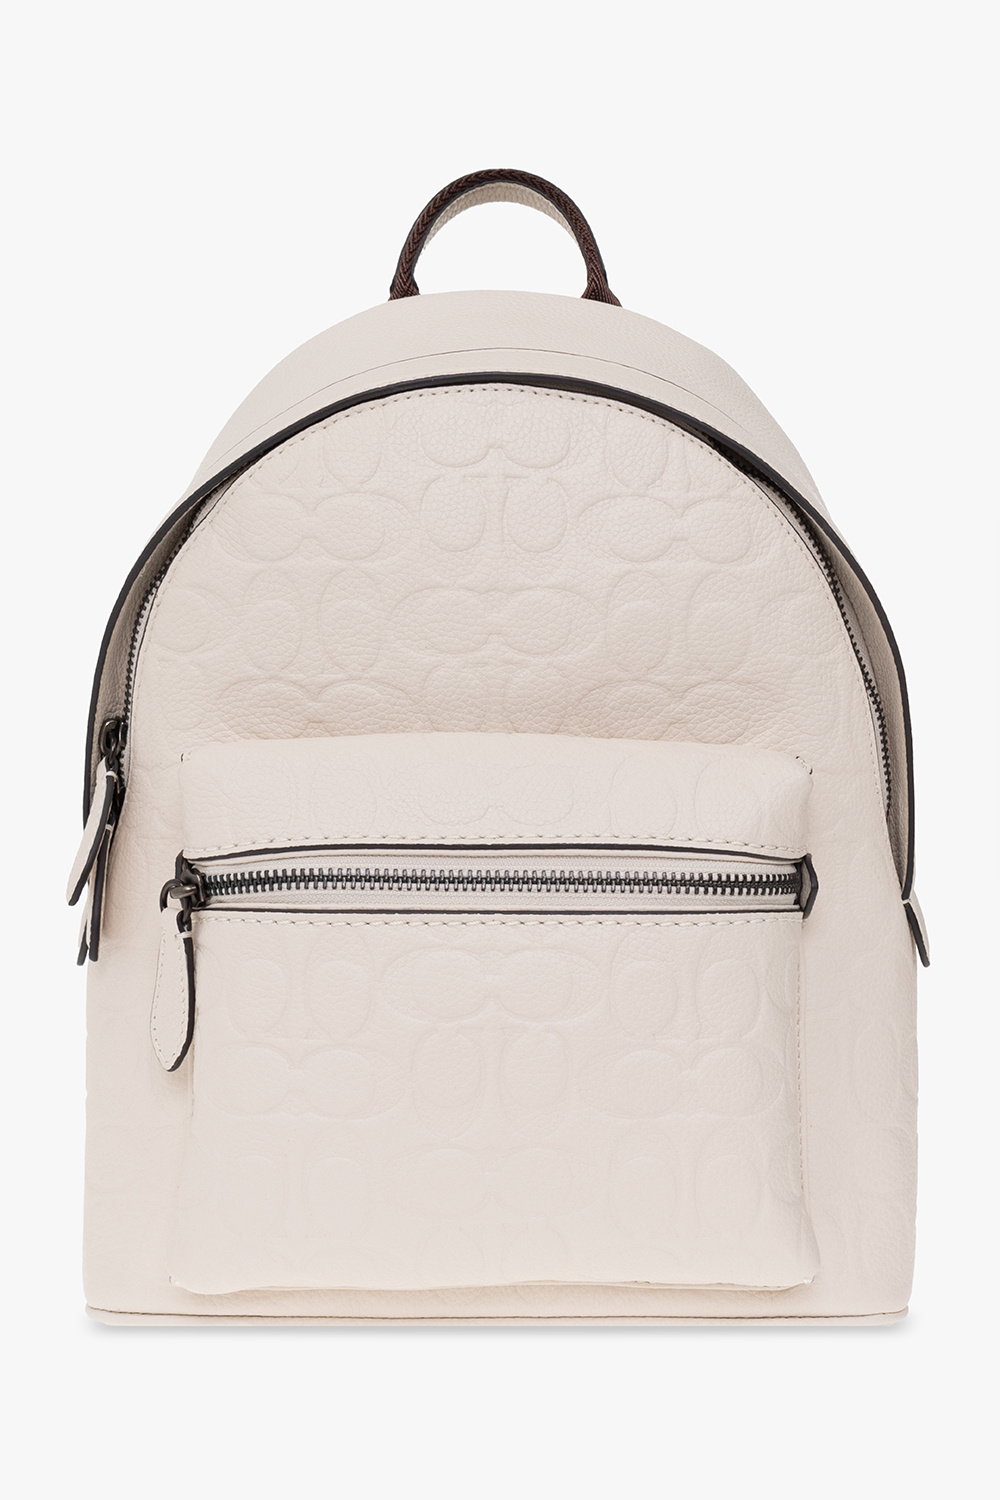 Coach ‘Charter’ leather backpack